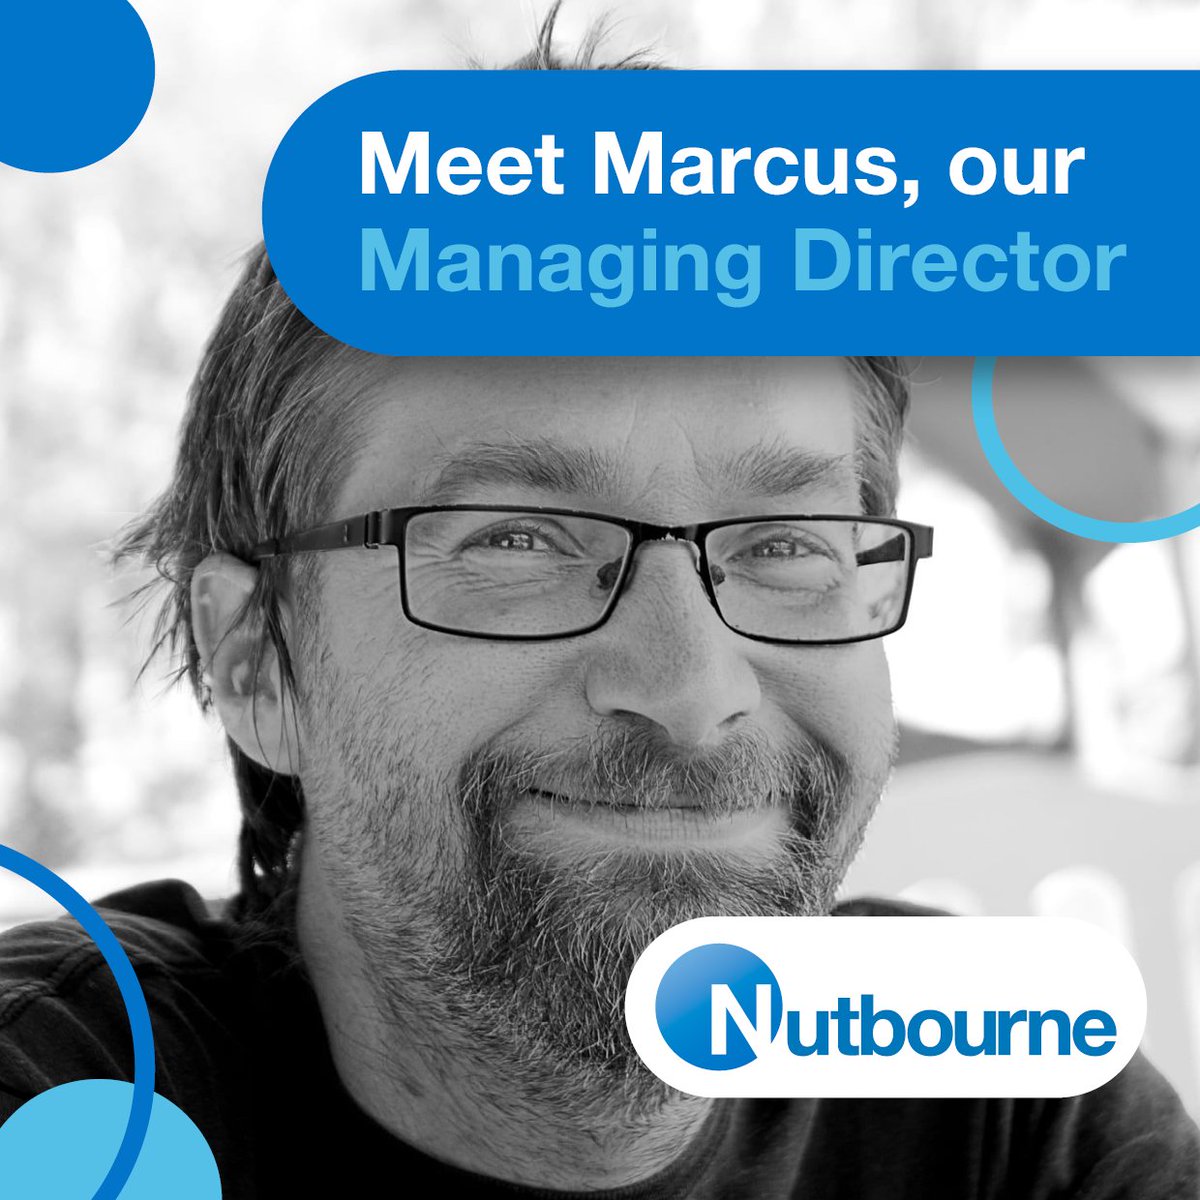 Meet Marcus Evans, our Managing Director! Nutbourne was founded in 2011 by Marcus Evans and Patrick Burgess. Marcus enjoys travelling, family time and archaeology. #TeamAppreciation #MeetTheTeam #NutbourneLtd #MD #ManagingDirector